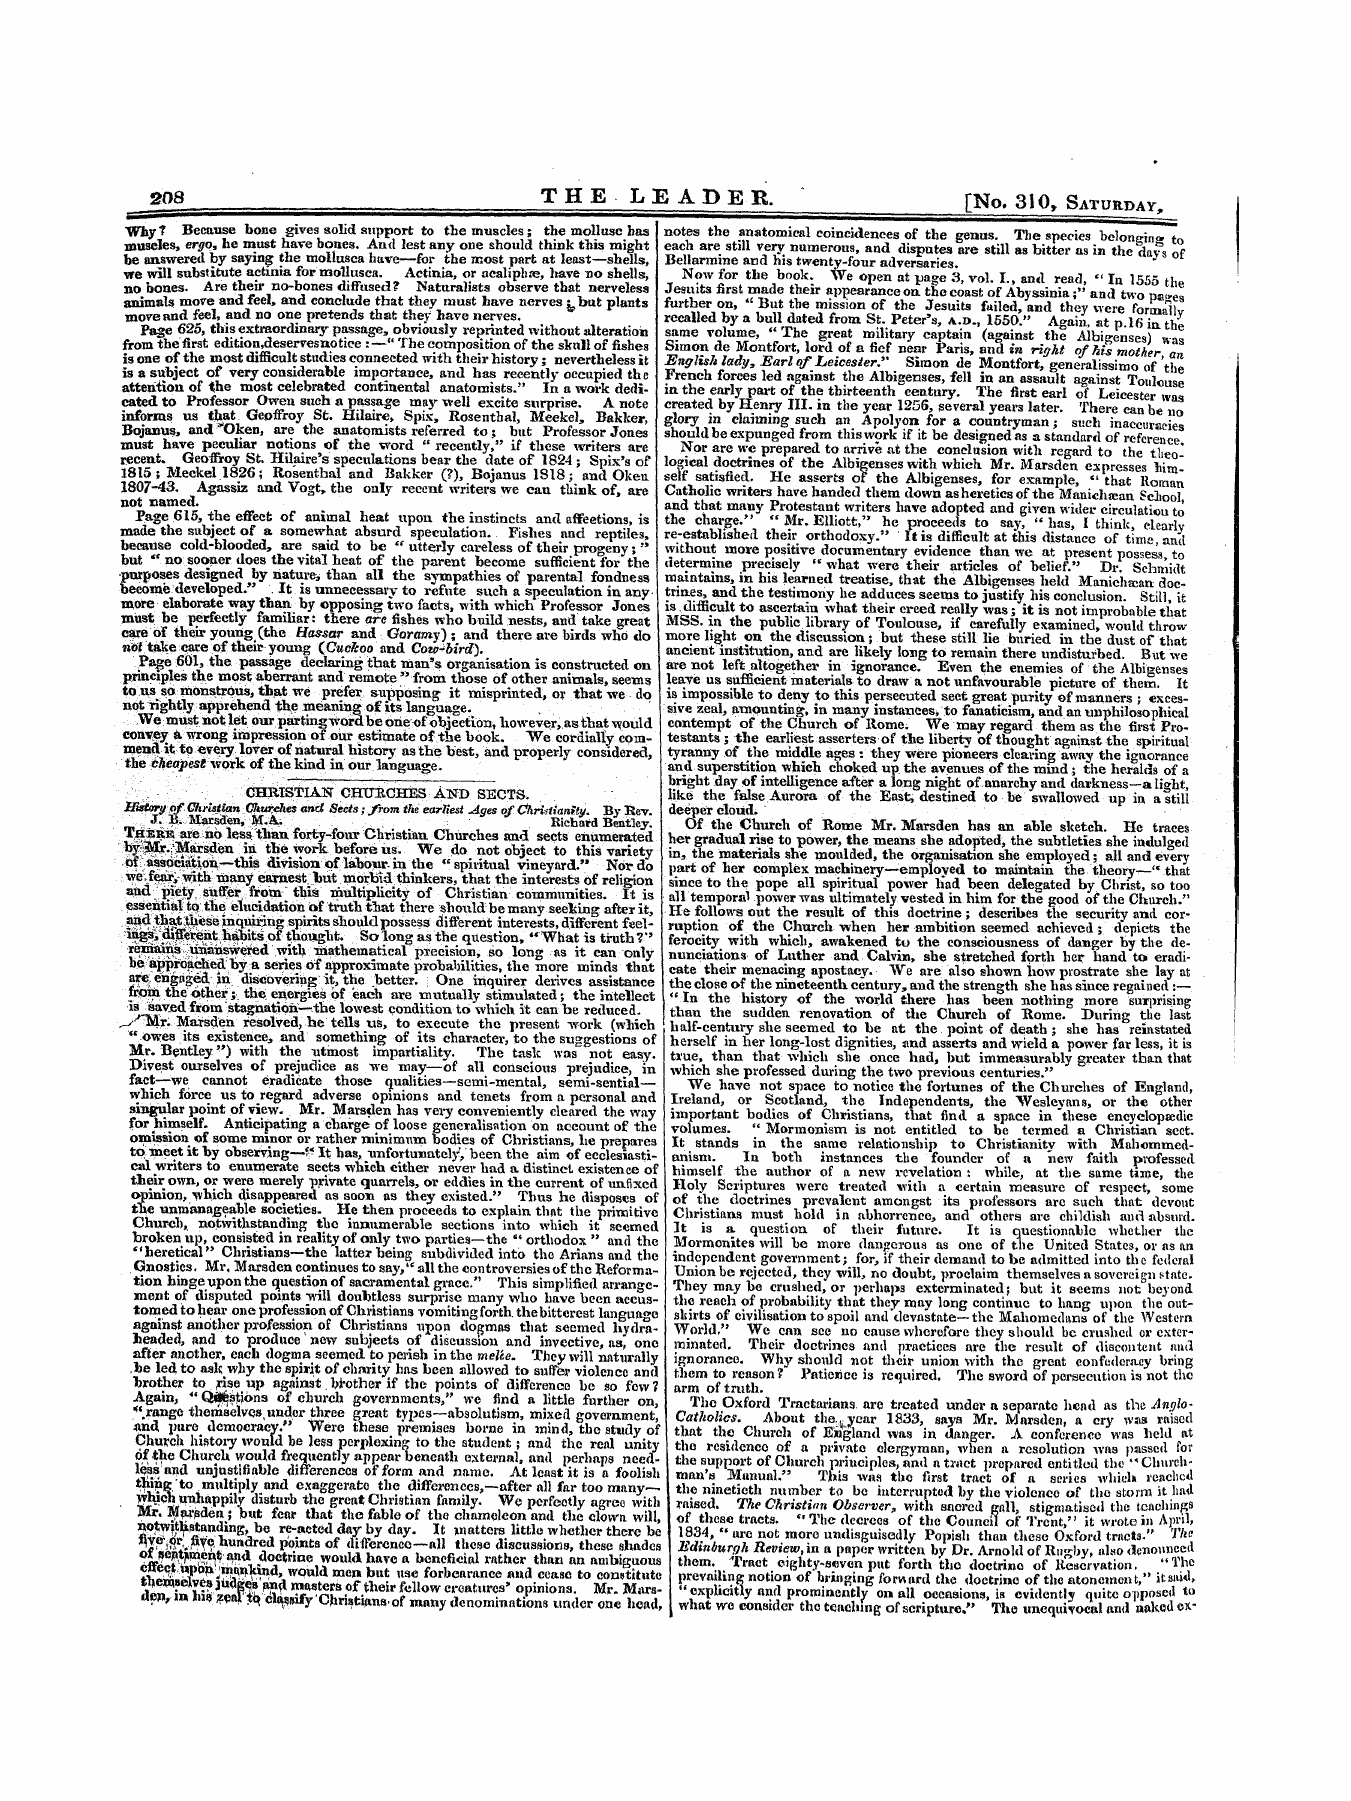 Leader (1850-1860): jS F Y, 1st edition: 16